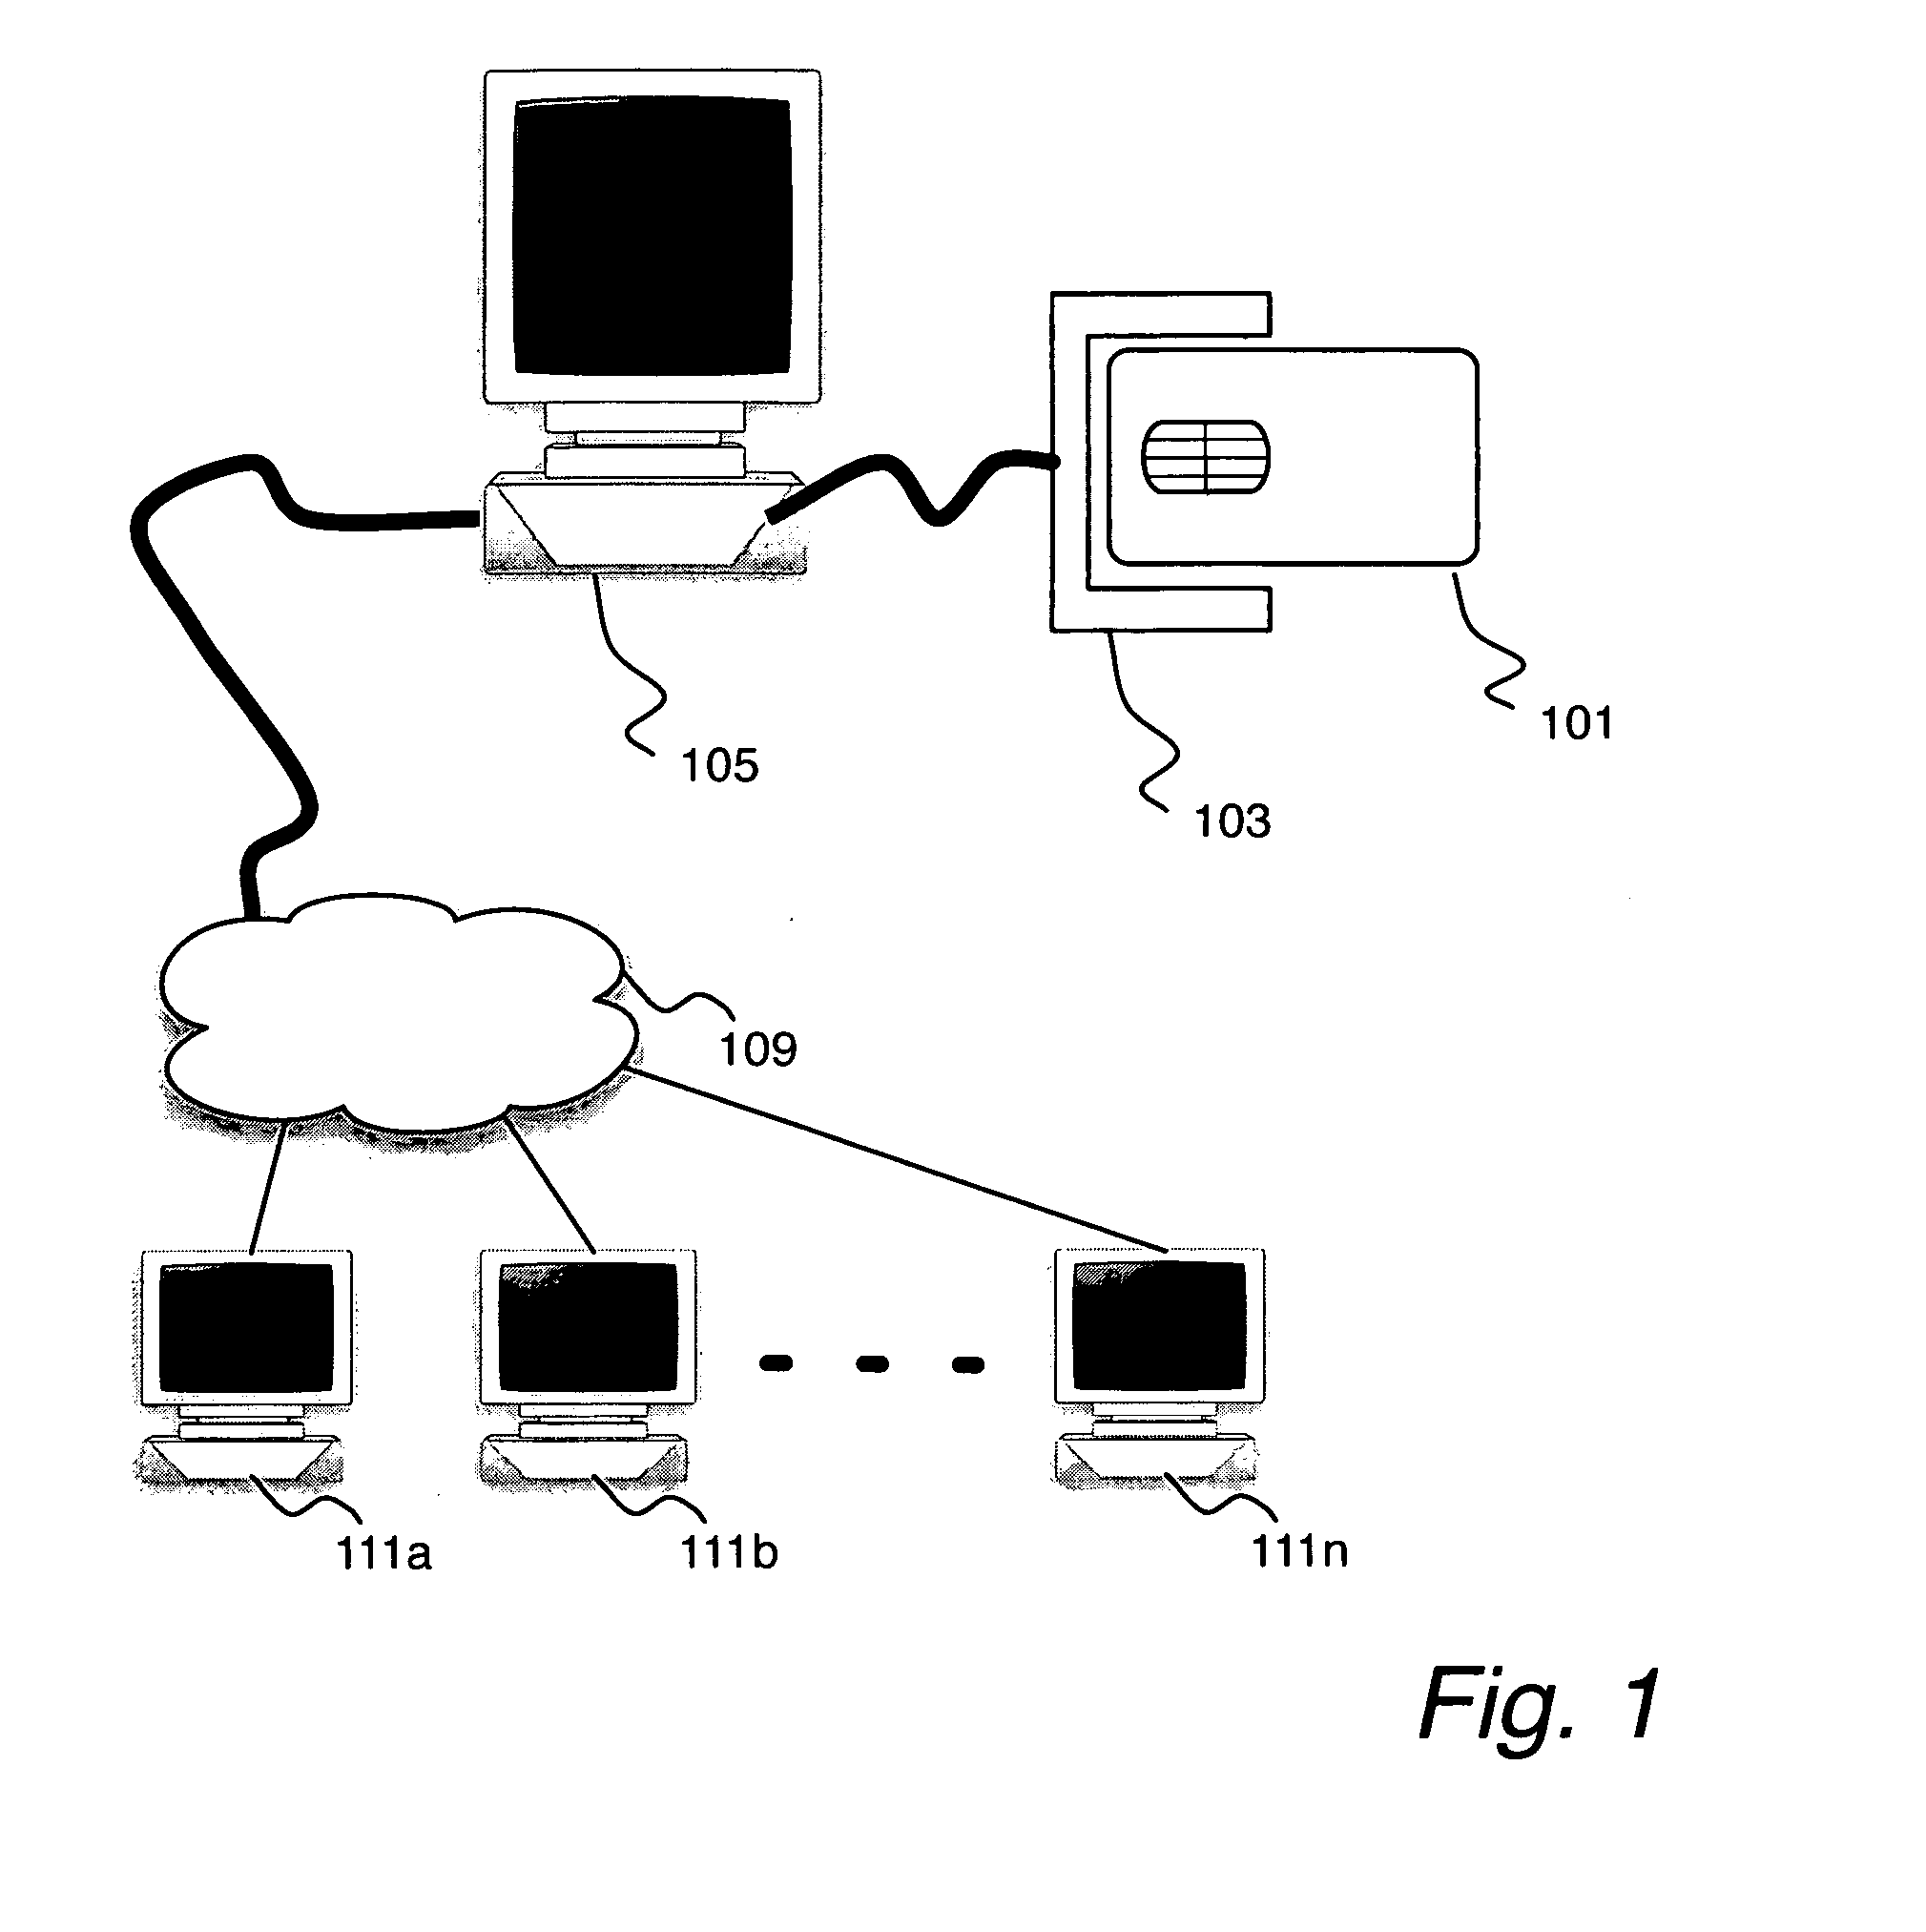 System and method for providing a hierarchical role-based access control